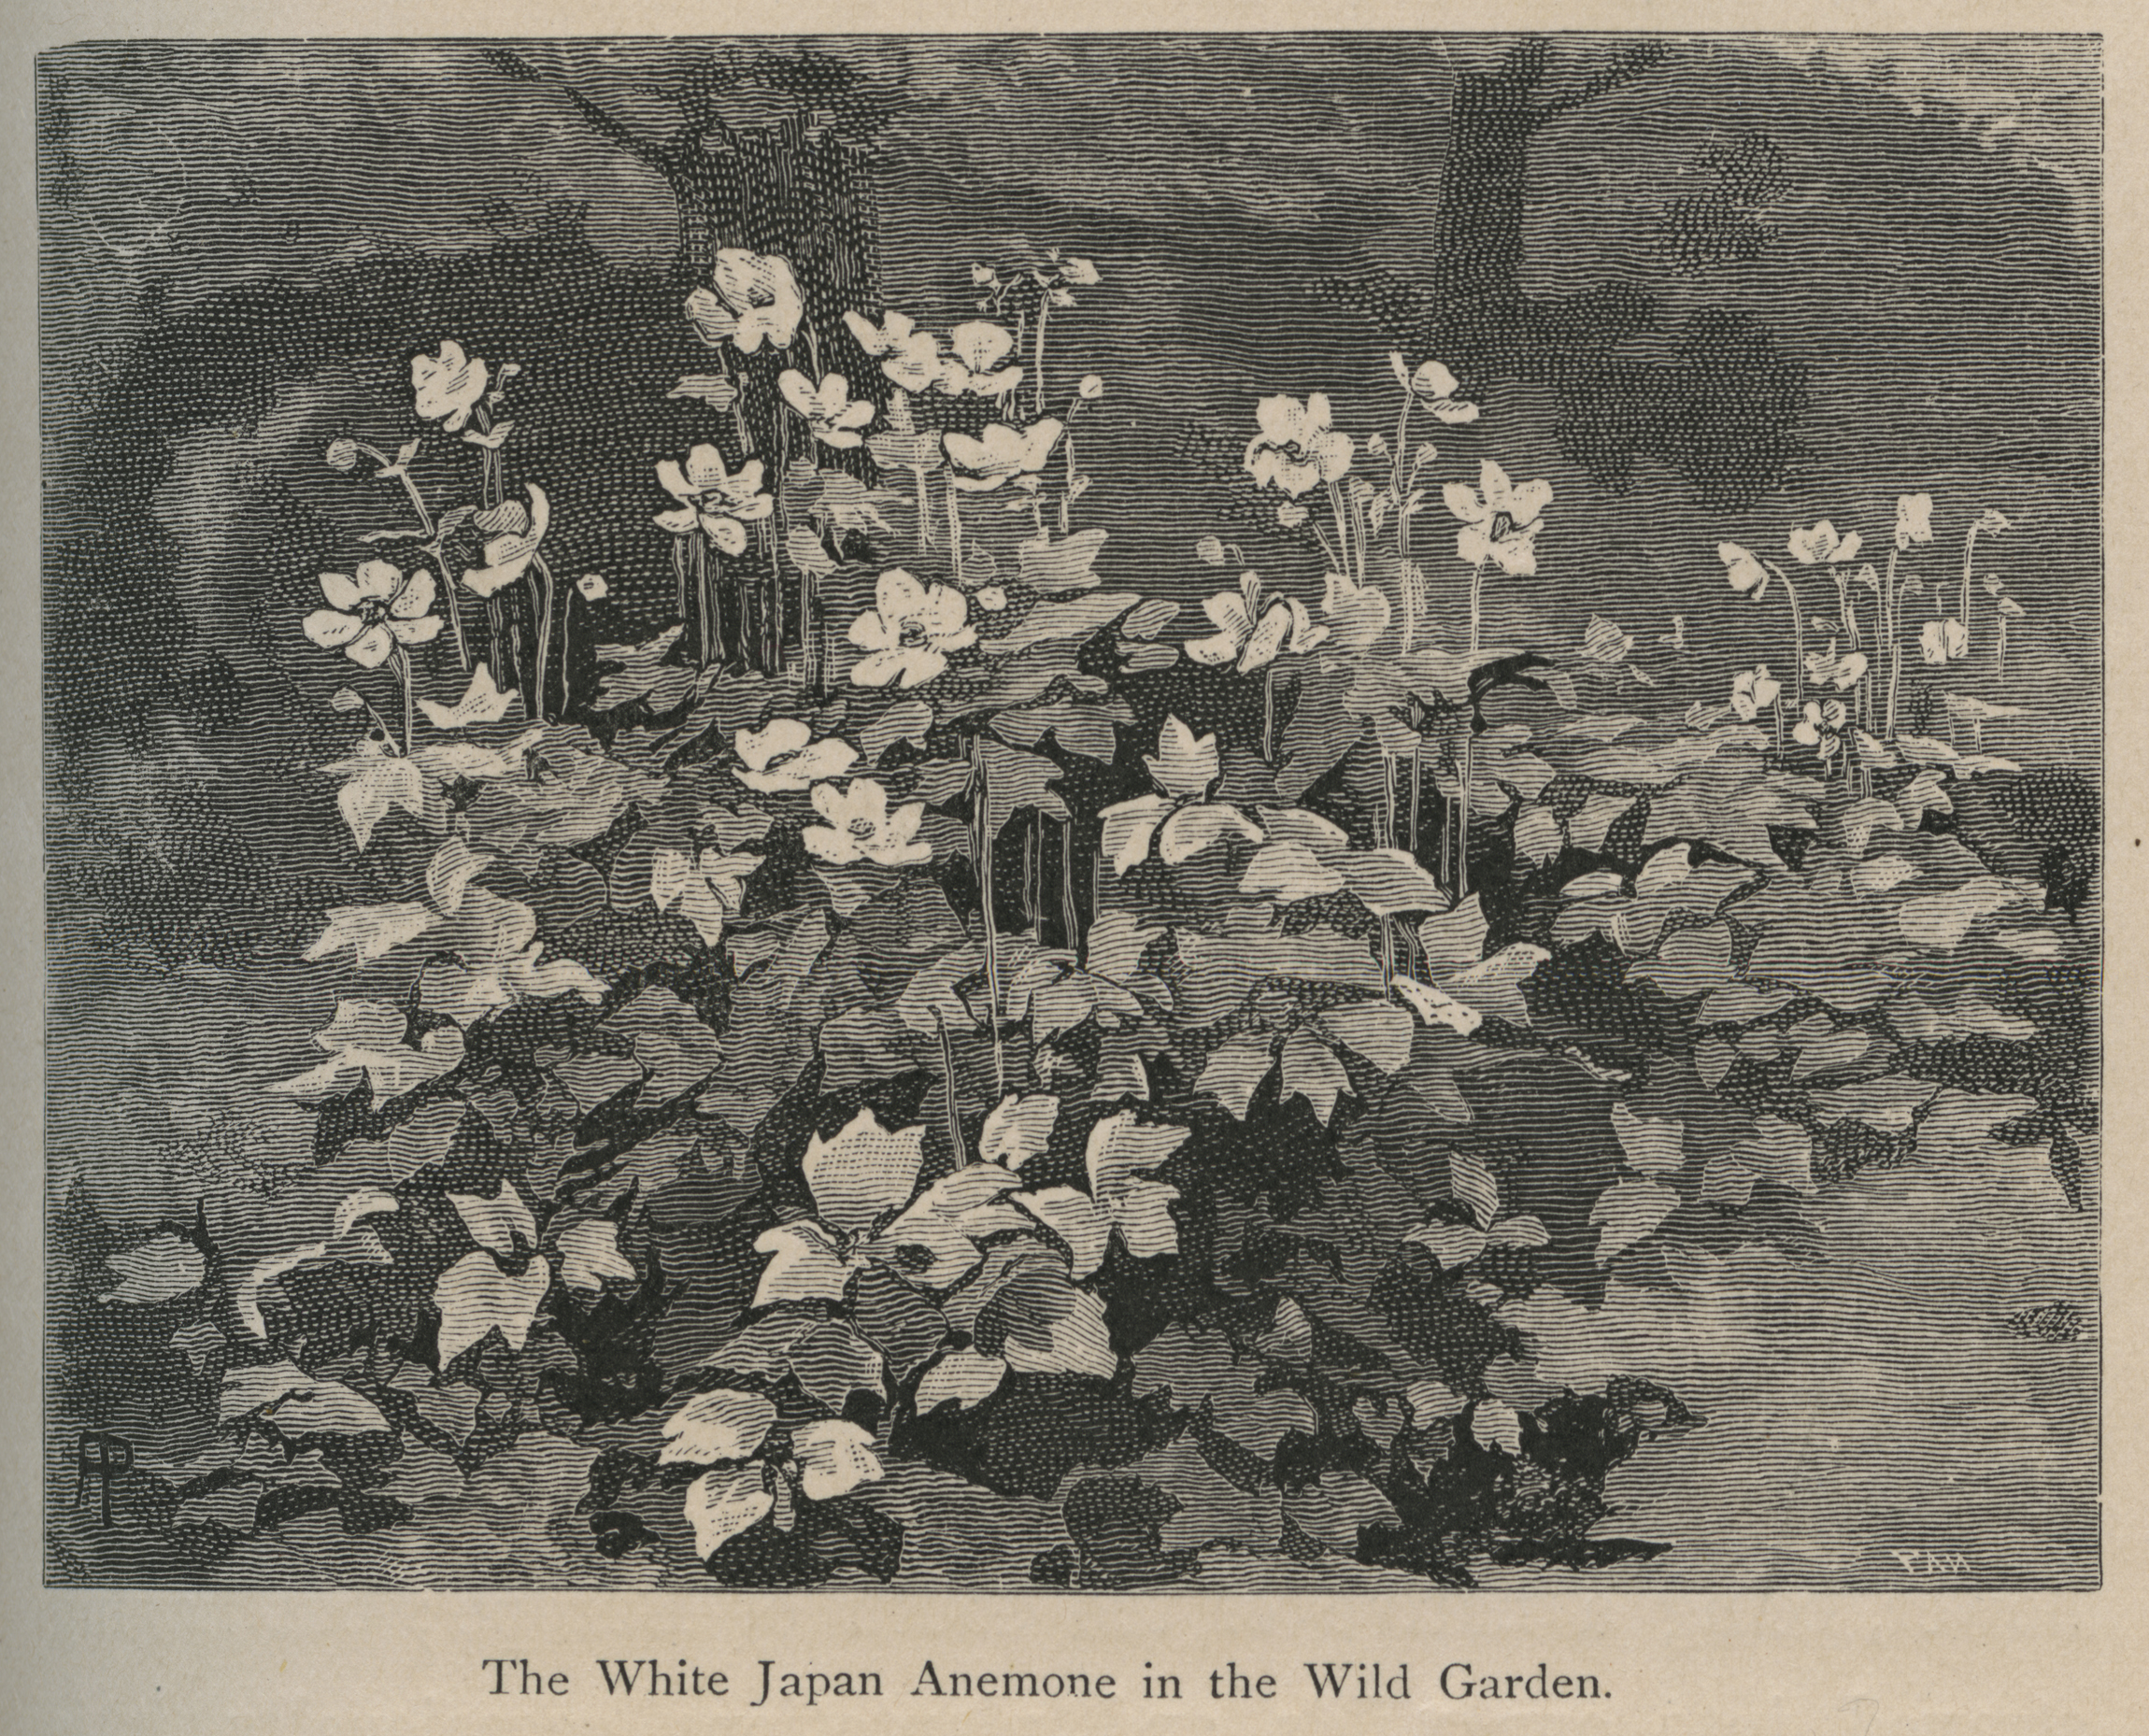 This illustration of a Japanese anemone in Robinson's The Wild Garden appeared later in American seed catalogs.